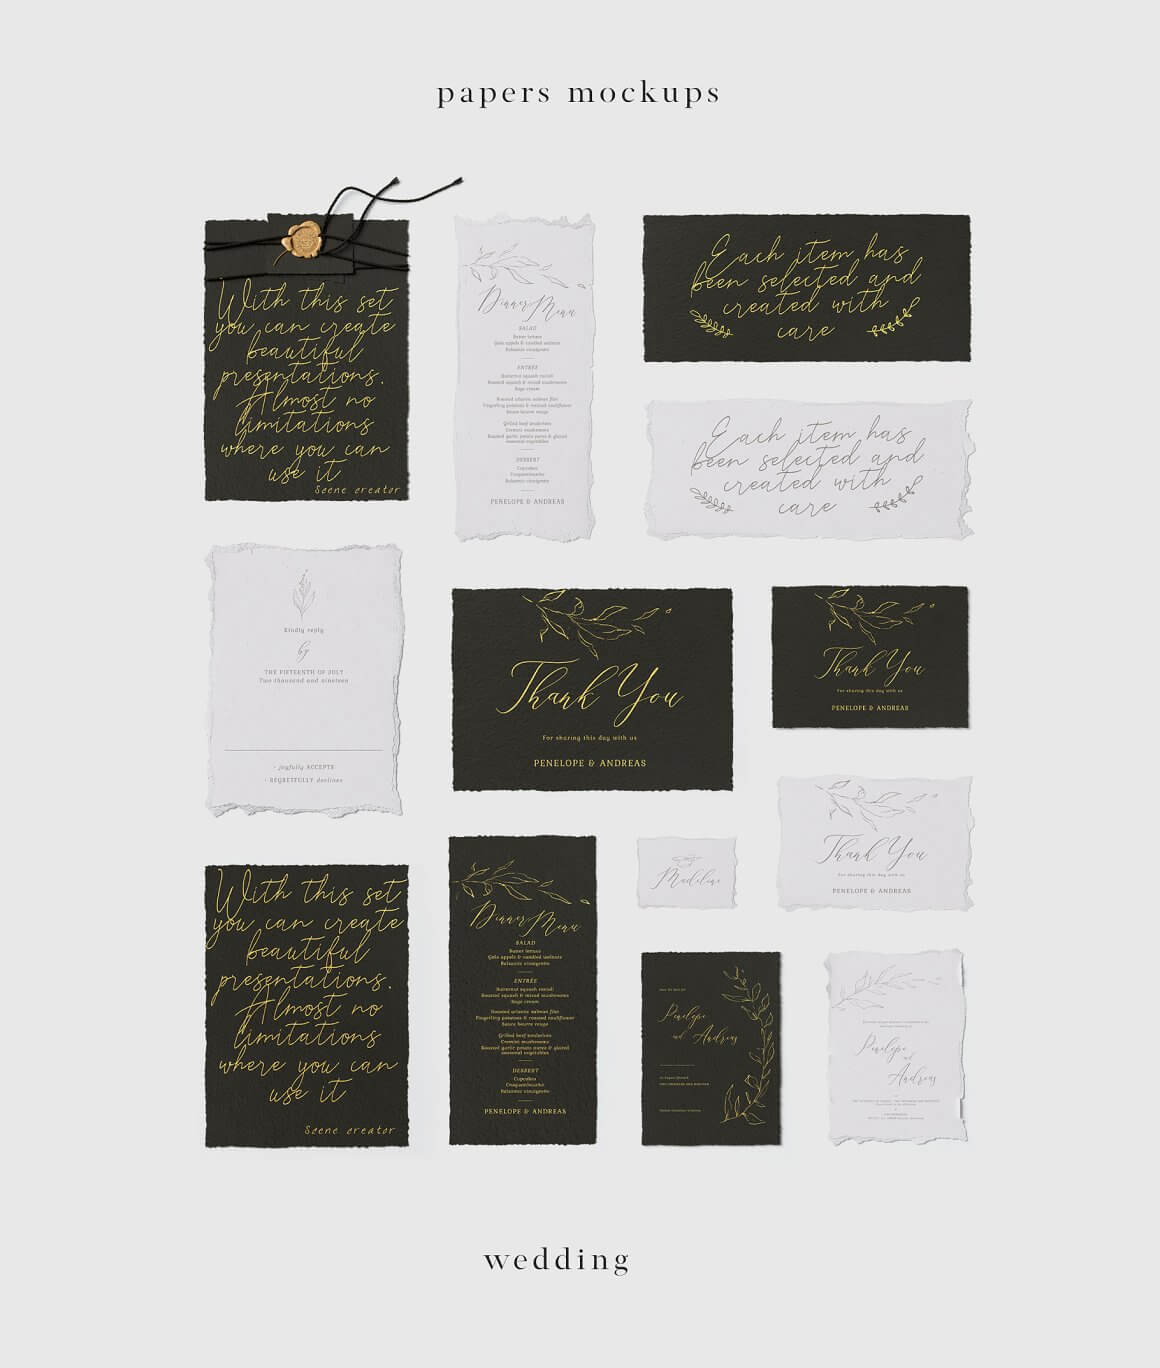 White and Black Papers Mockups Wedding.